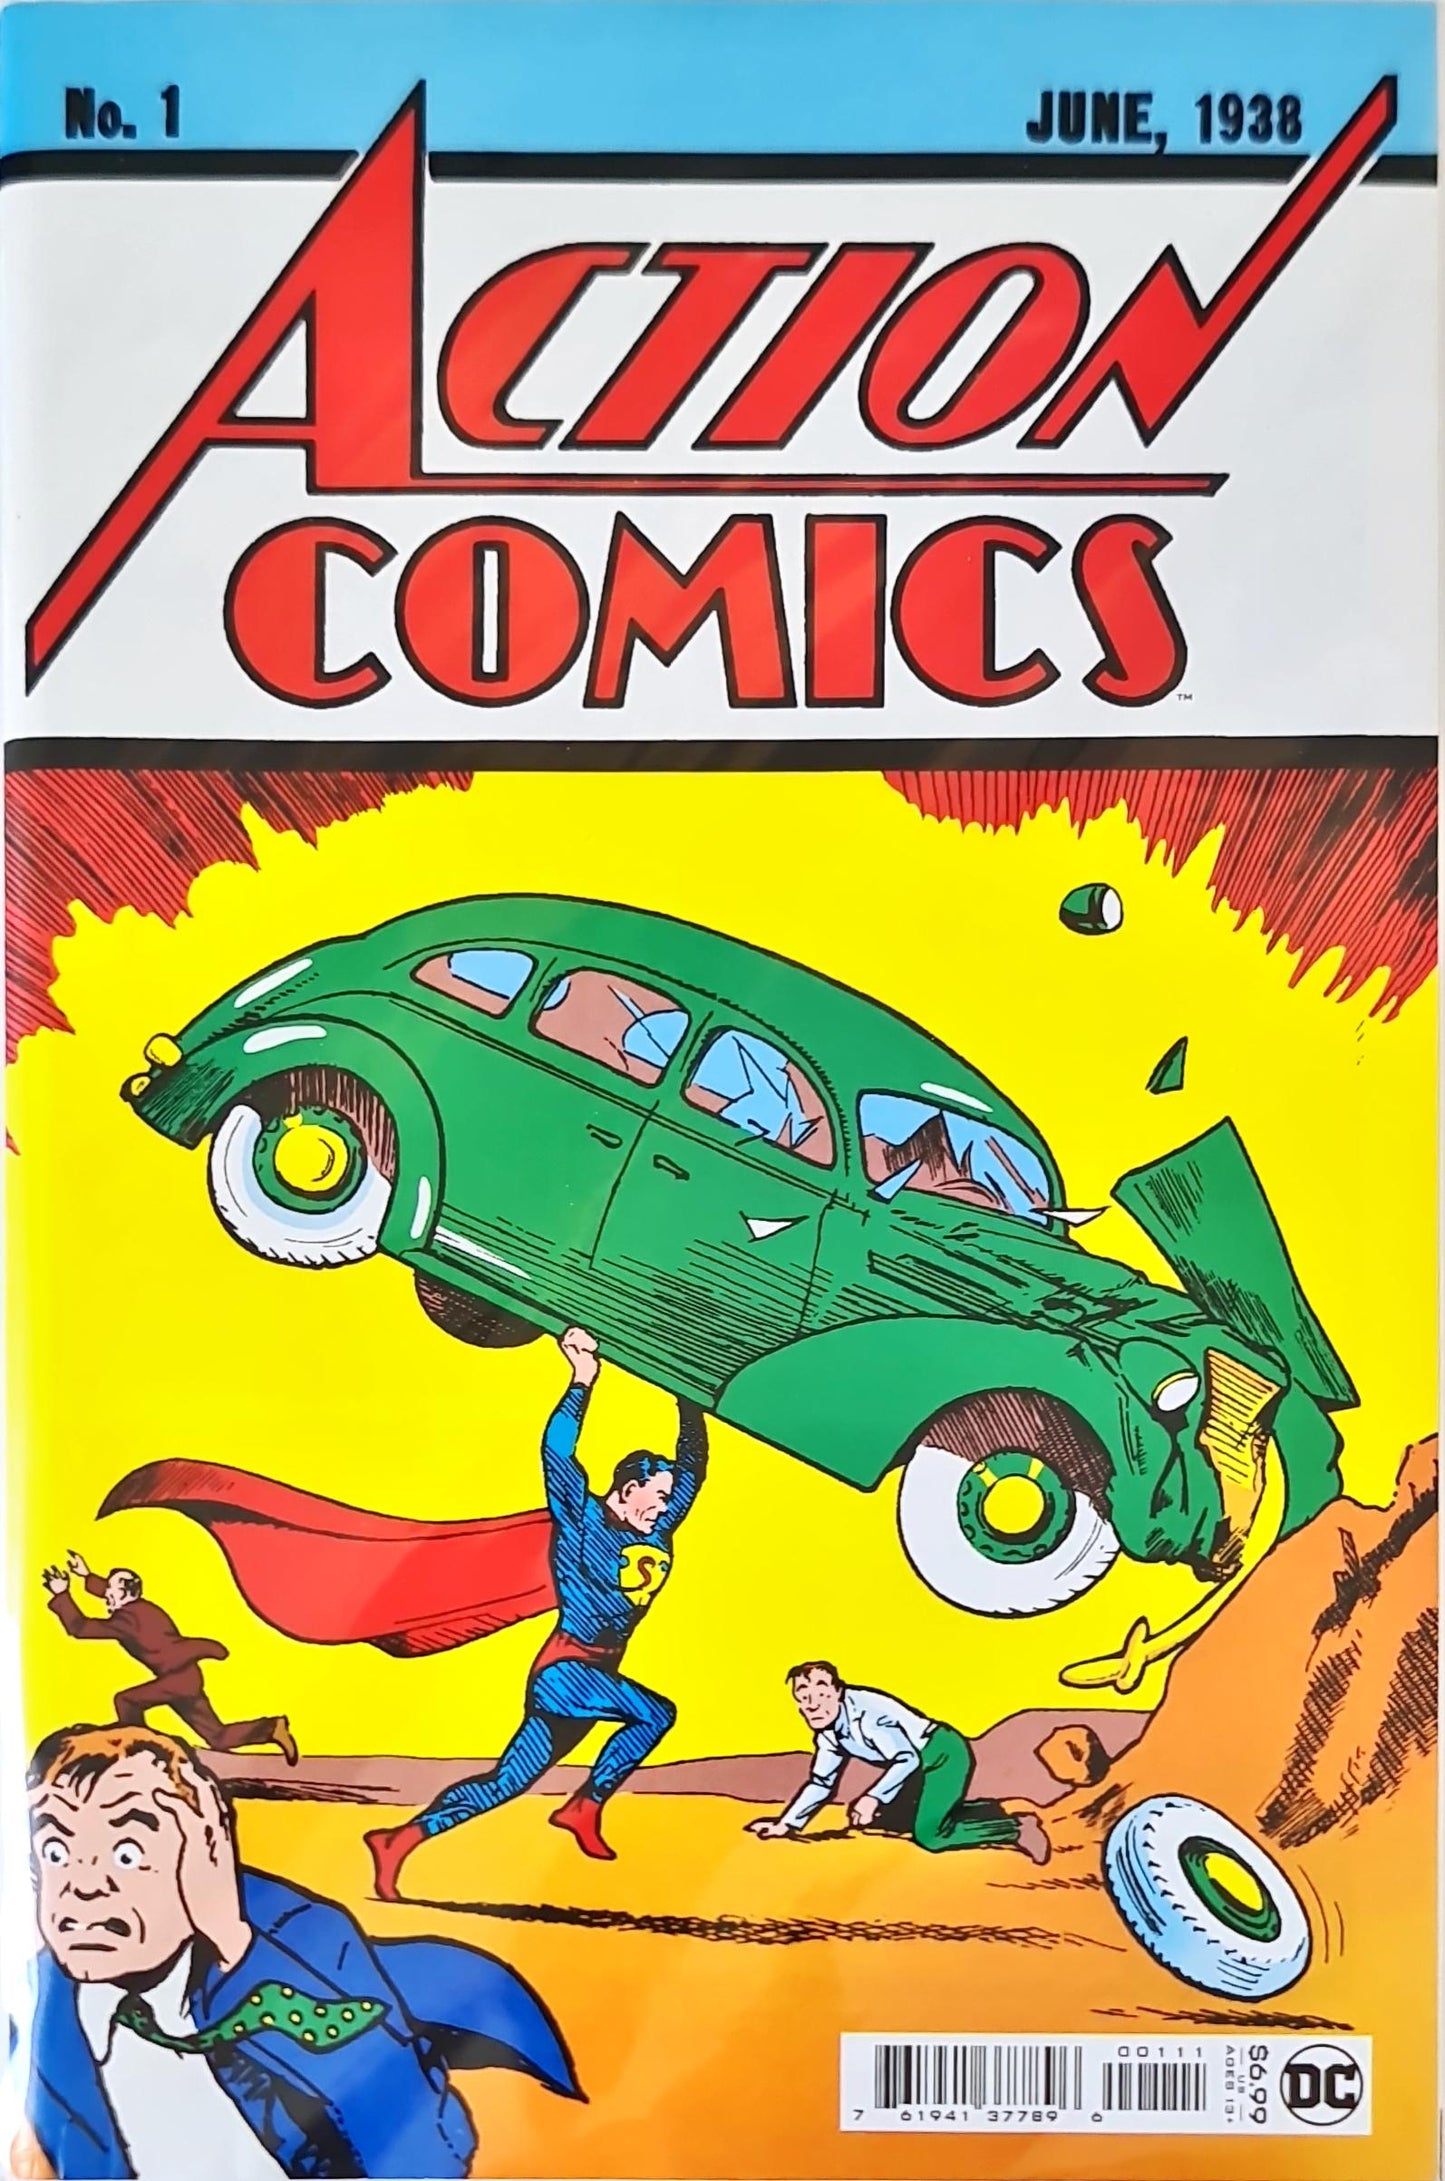 Action Comics #1 (2022 Reprint) 1st Appearance Superman Key Issue